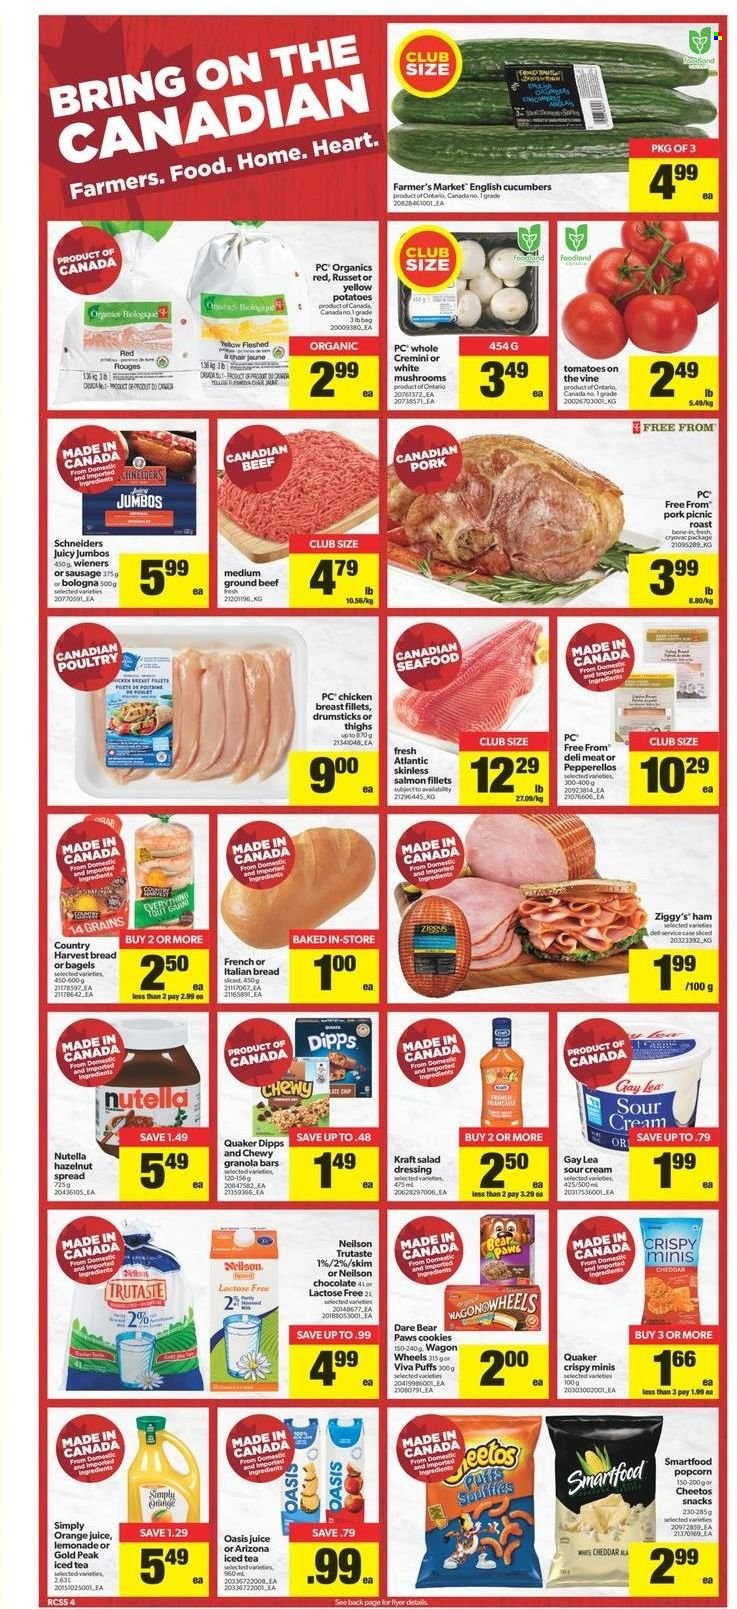 thumbnail - Real Canadian Superstore Flyer - December 30, 2021 - January 05, 2022 - Sales products - bagels, puffs, russet potatoes, tomatoes, potatoes, salmon, salmon fillet, Quaker, Kraft®, ham, bologna sausage, sausage, cheddar, sour cream, Country Harvest, cookies, chocolate, snack, Cheetos, Smartfood, popcorn, granola bar, dressing, hazelnut spread, lemonade, orange juice, juice, ice tea, AriZona, beef meat, ground beef, Paws, wagon, Nutella. Page 4.